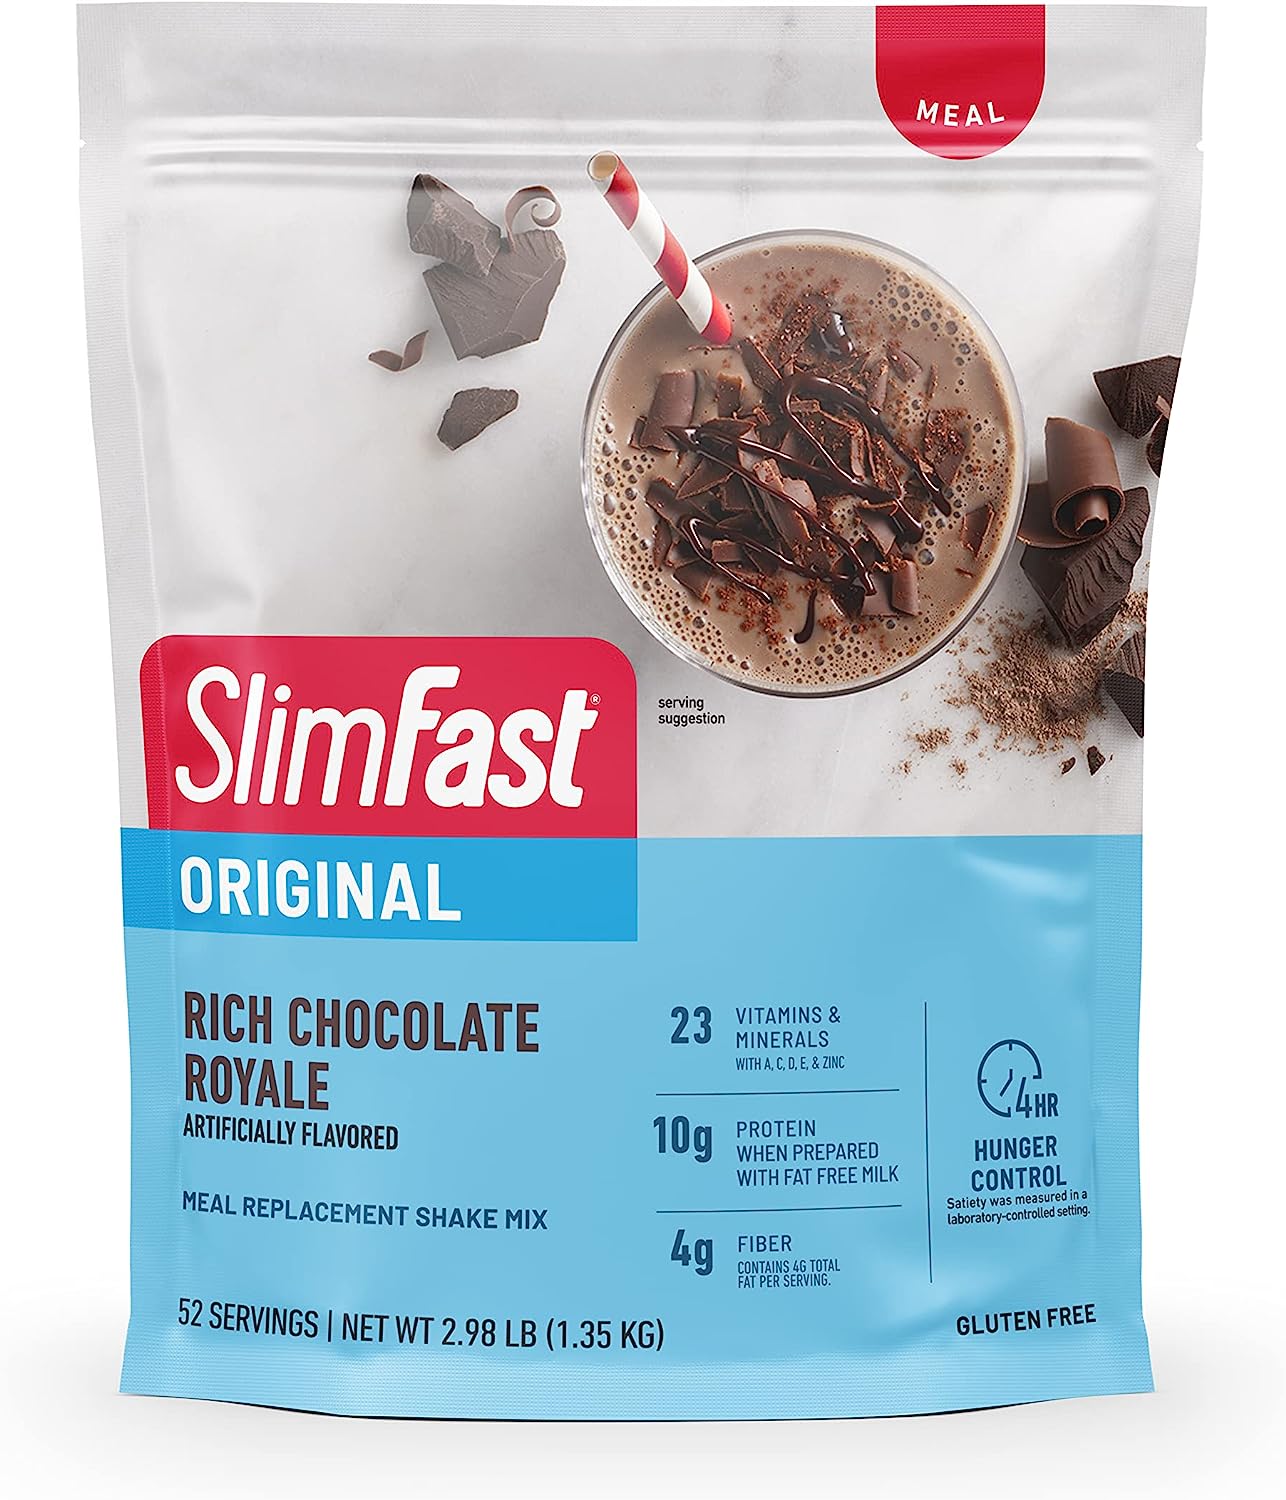 SlimFast Meal Replacement Powder, Original Rich Chocolate Royale, Shake Mix, 10g of Protein, 52 Servings (Packaging May